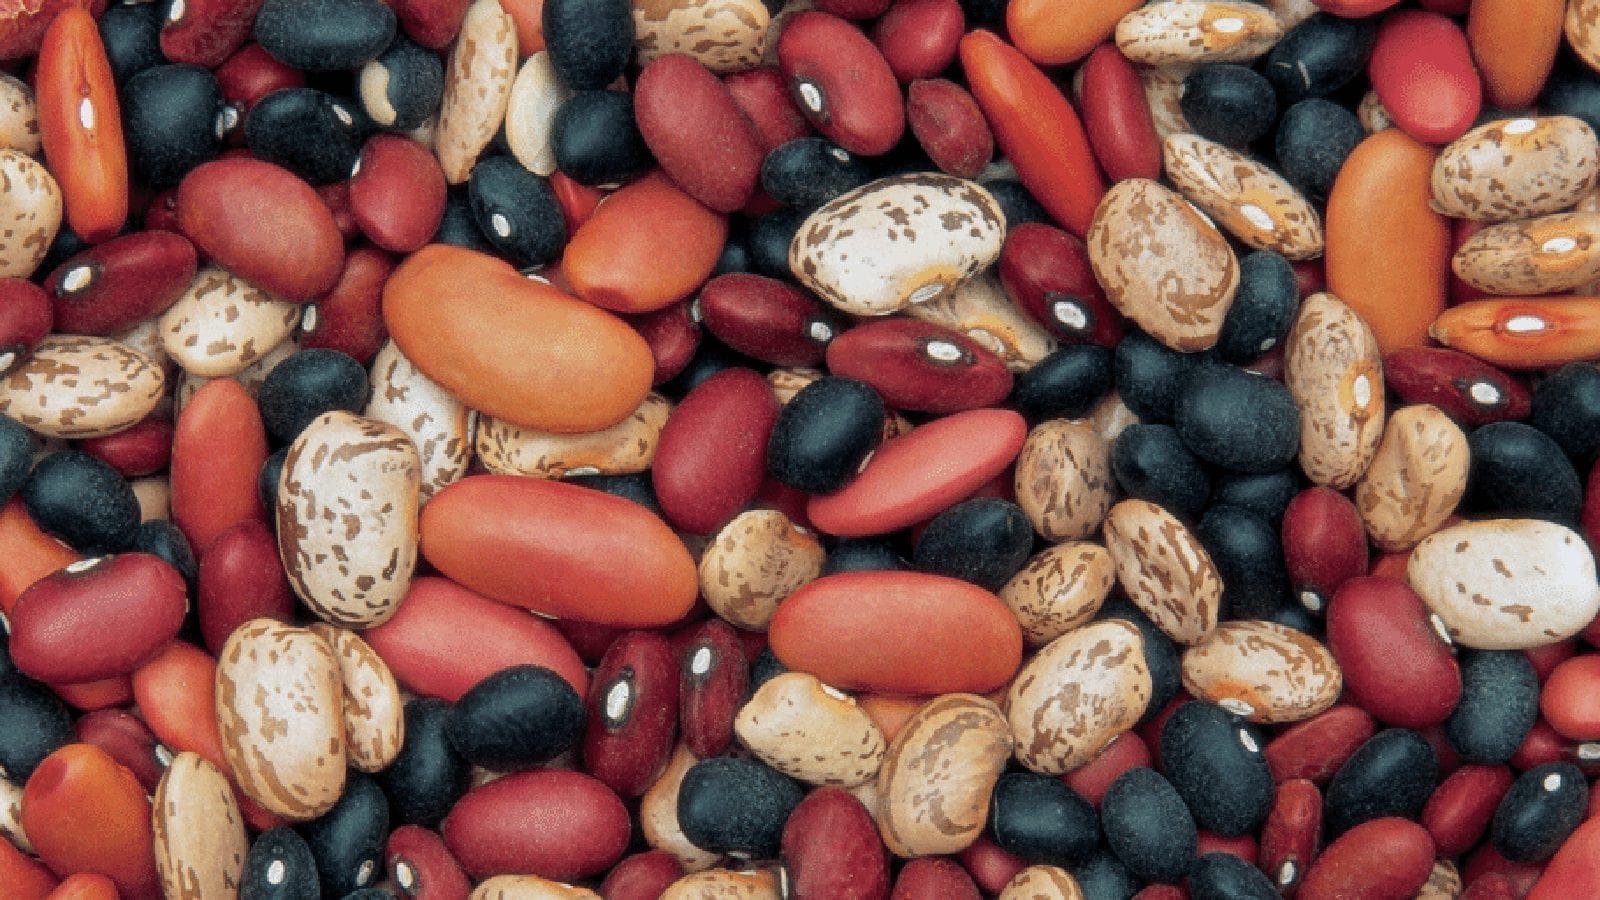 South Africa’s dry bean production expected to decline by 13% prompting rise in imports, reduction in exports